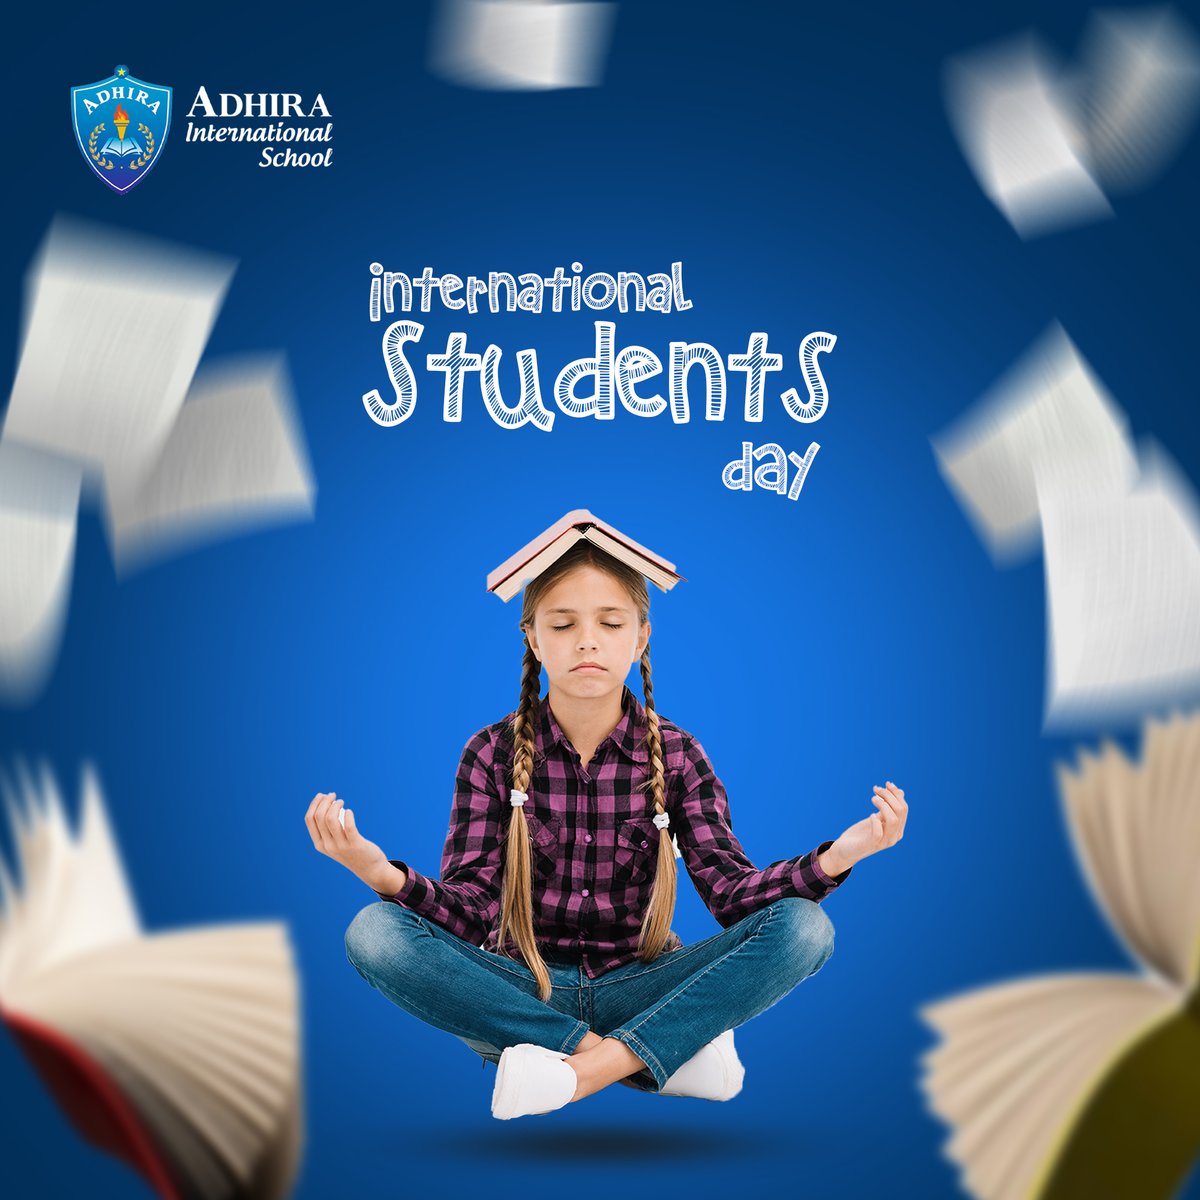 From different corners of the world, we unite in pursuit of knowledge. Happy International Students Day! 🌍📚 #GlobalLearners
.
.
.
.
#AdhiraInternationalSchool
.
.
.
.
#cute #follow #followme #nature #Tiktok #travel #followme #fashion #love #trend #photography #Coimbatore